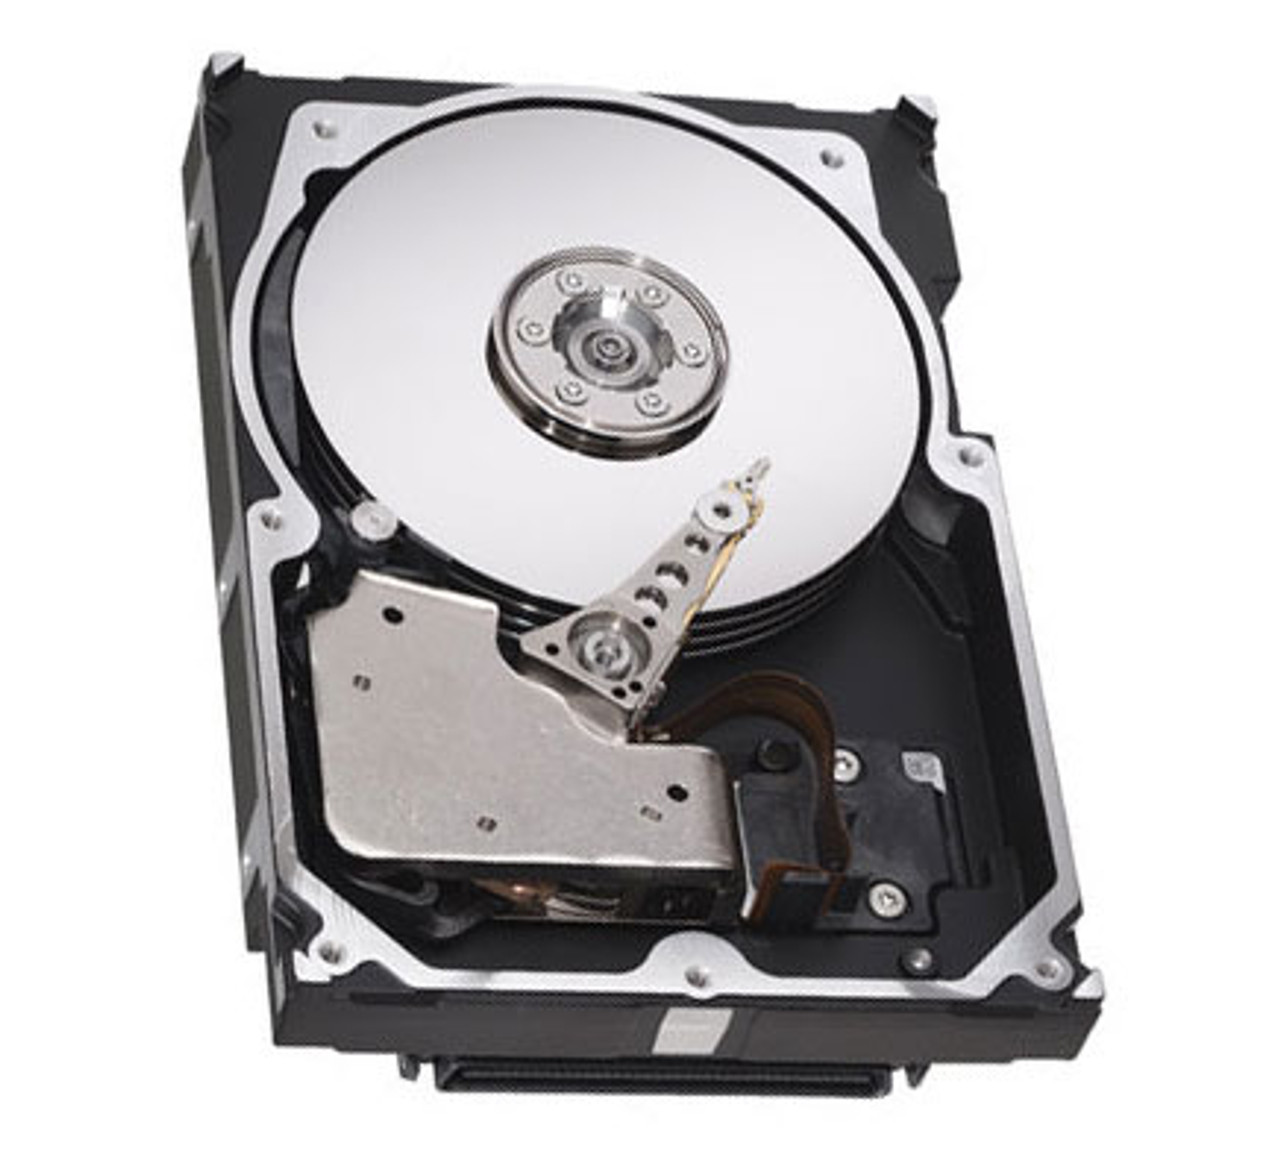 3F742 Dell 73GB 10000RPM Ultra-160 SCSI 80-Pin Hot Swap 8MB Cache 3.5-inch Internal Hard Drive with Tray